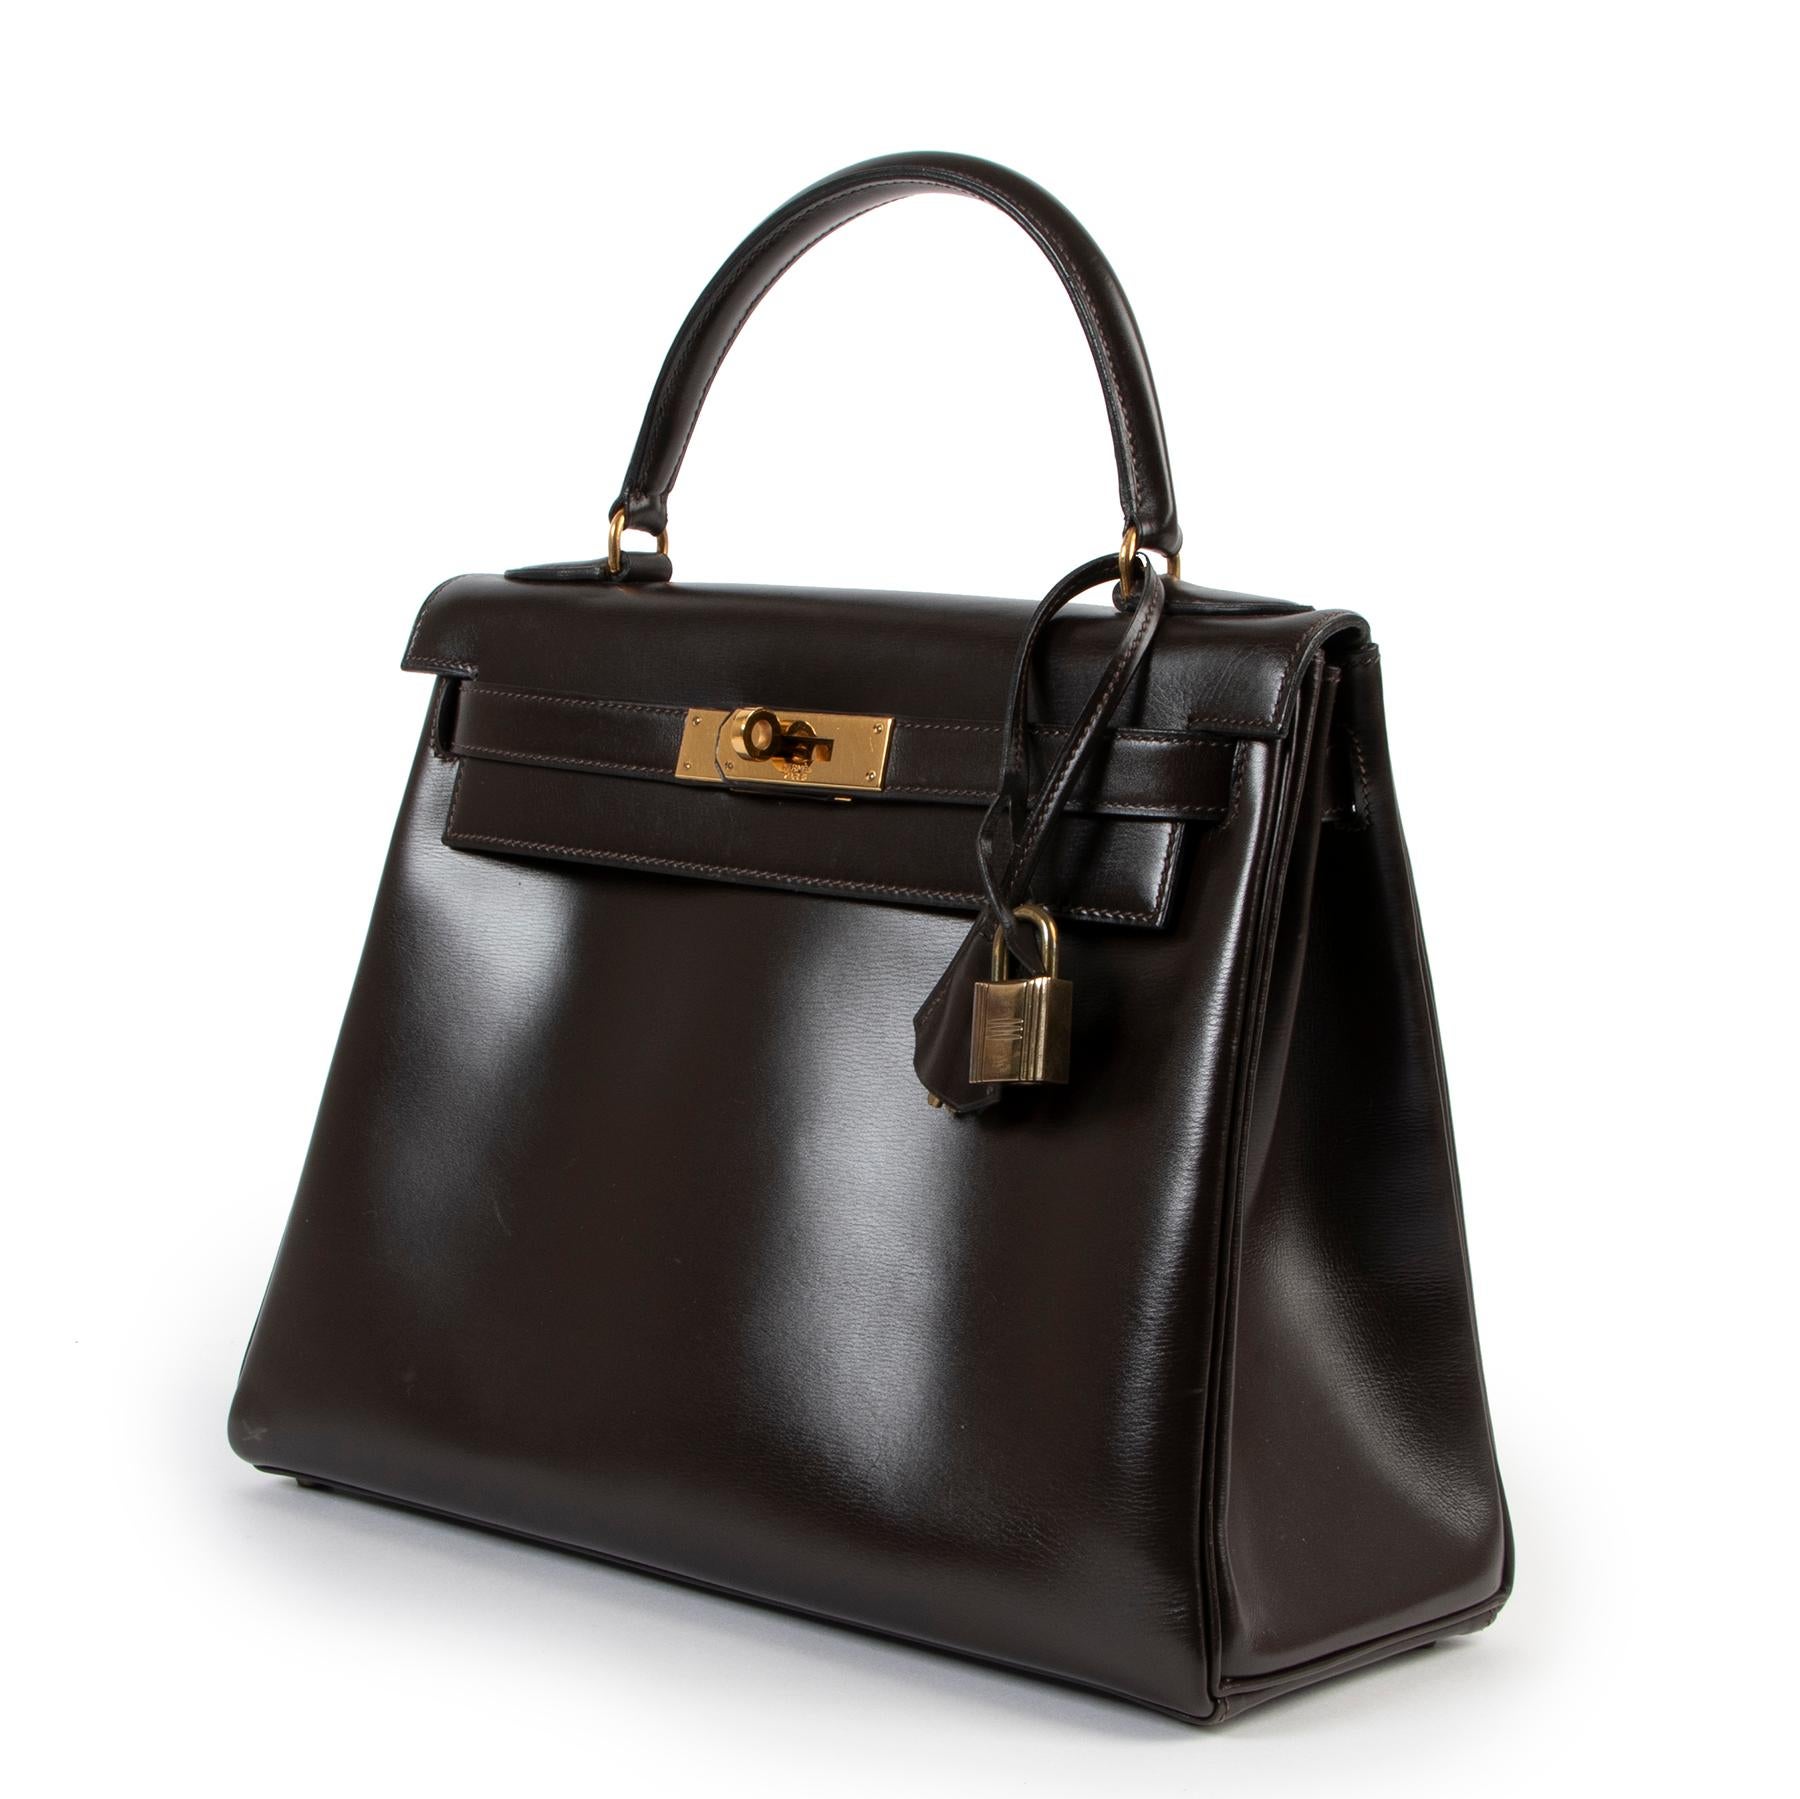 Hermès Kelly 28 Box Calf Marron

We can all agree on the fact that there is no bag more timeless and chique than the Hermès Kelly bag. This vintage Kelly 28 is crafted from brown box calf leather and finished with gold-toned hardware. On the inside,